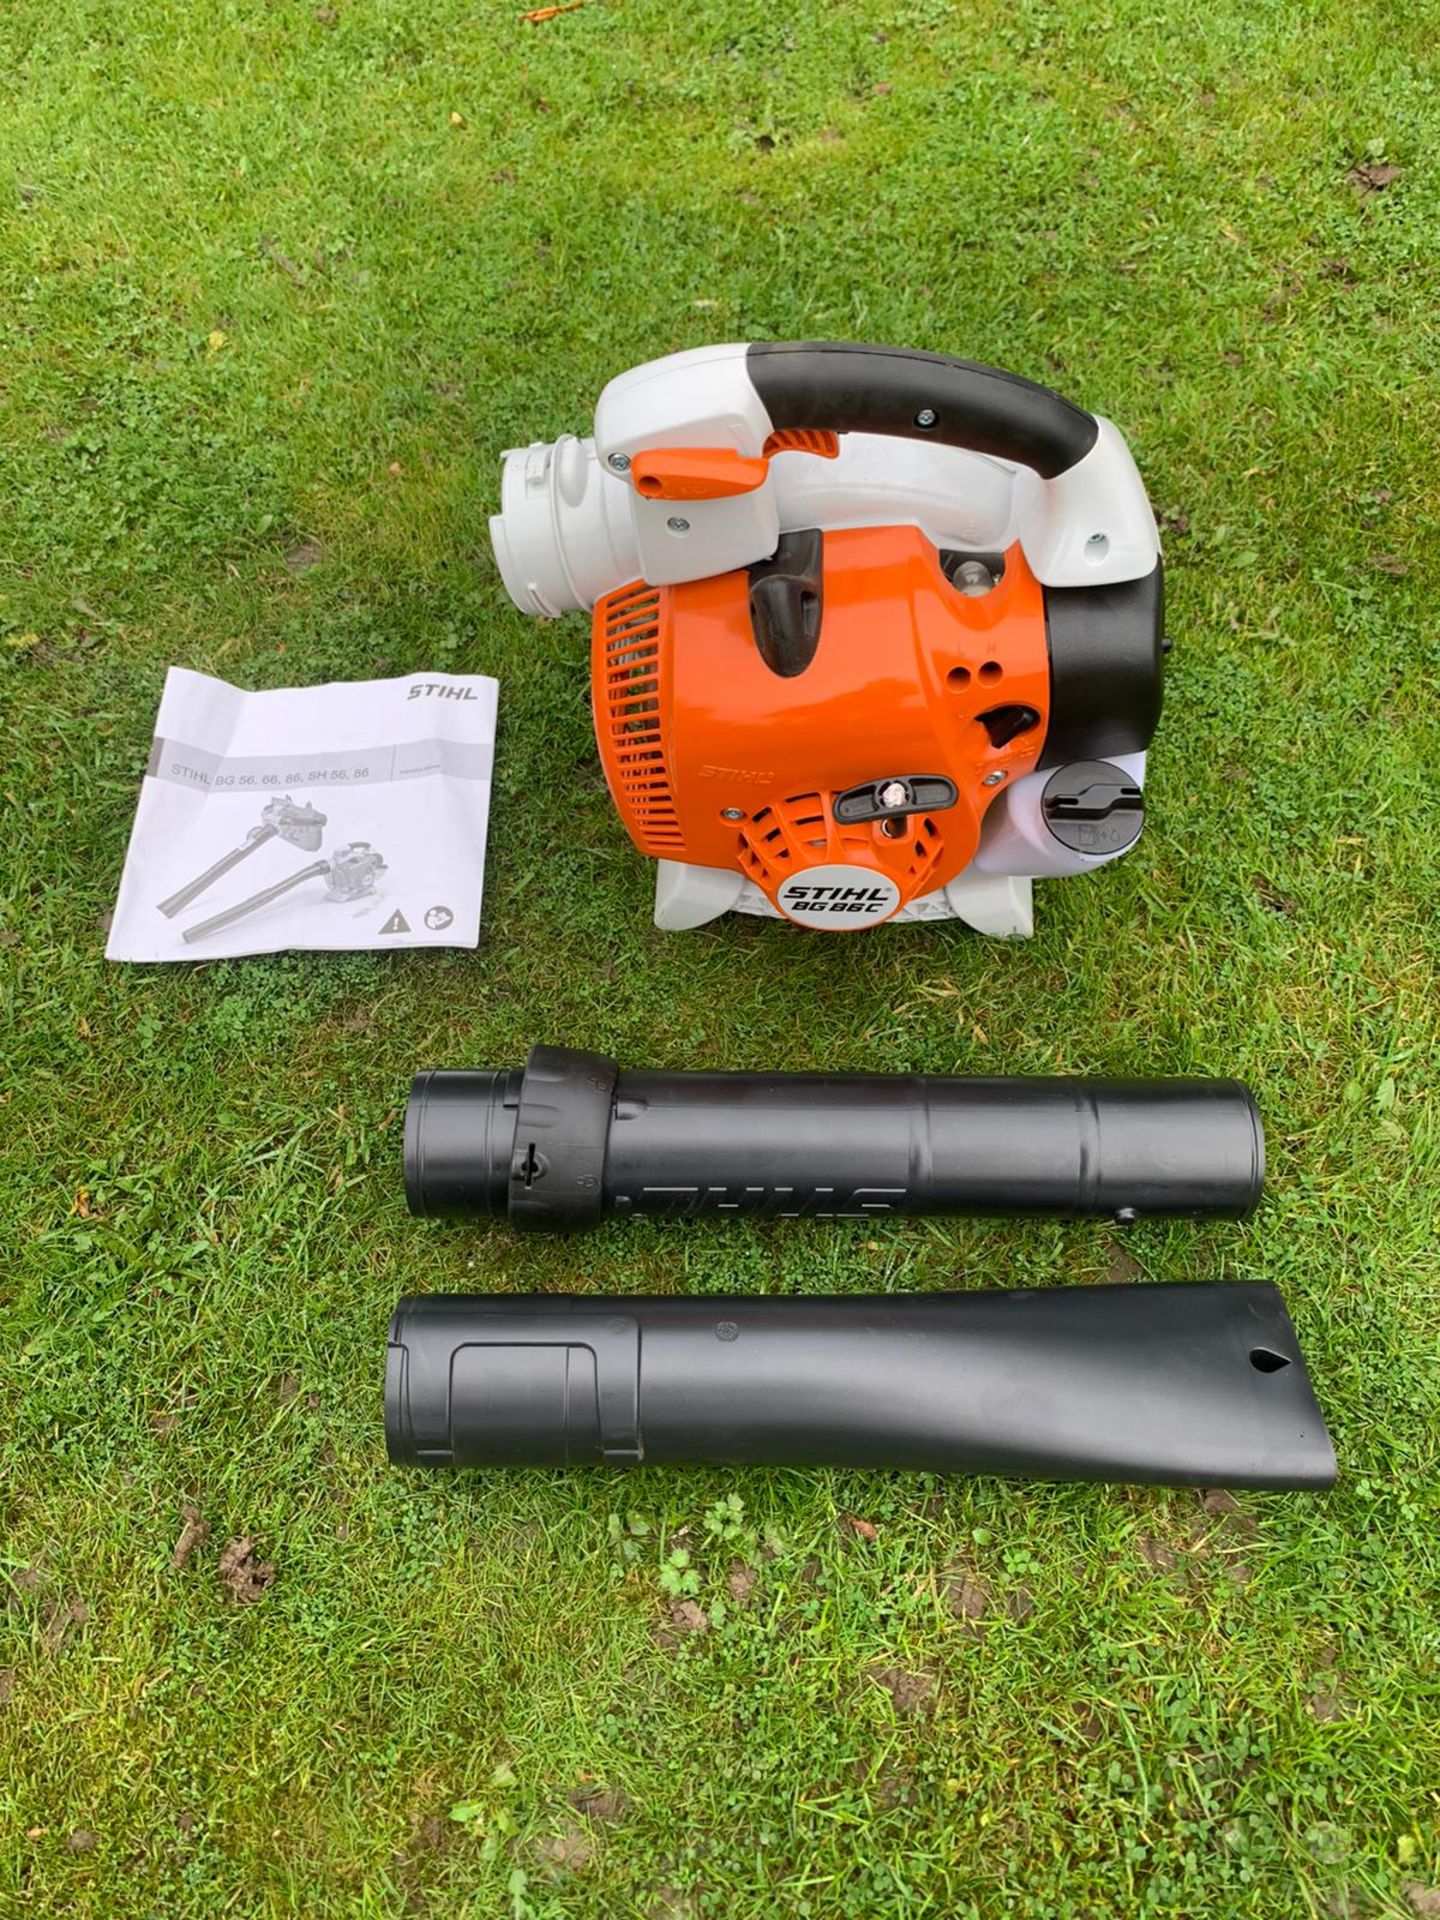 BRAND NEW AND UNUSED STIHL BG86C-E LEAF BLOWER, COMES WITH MANUAL *NO VAT* - Image 2 of 3